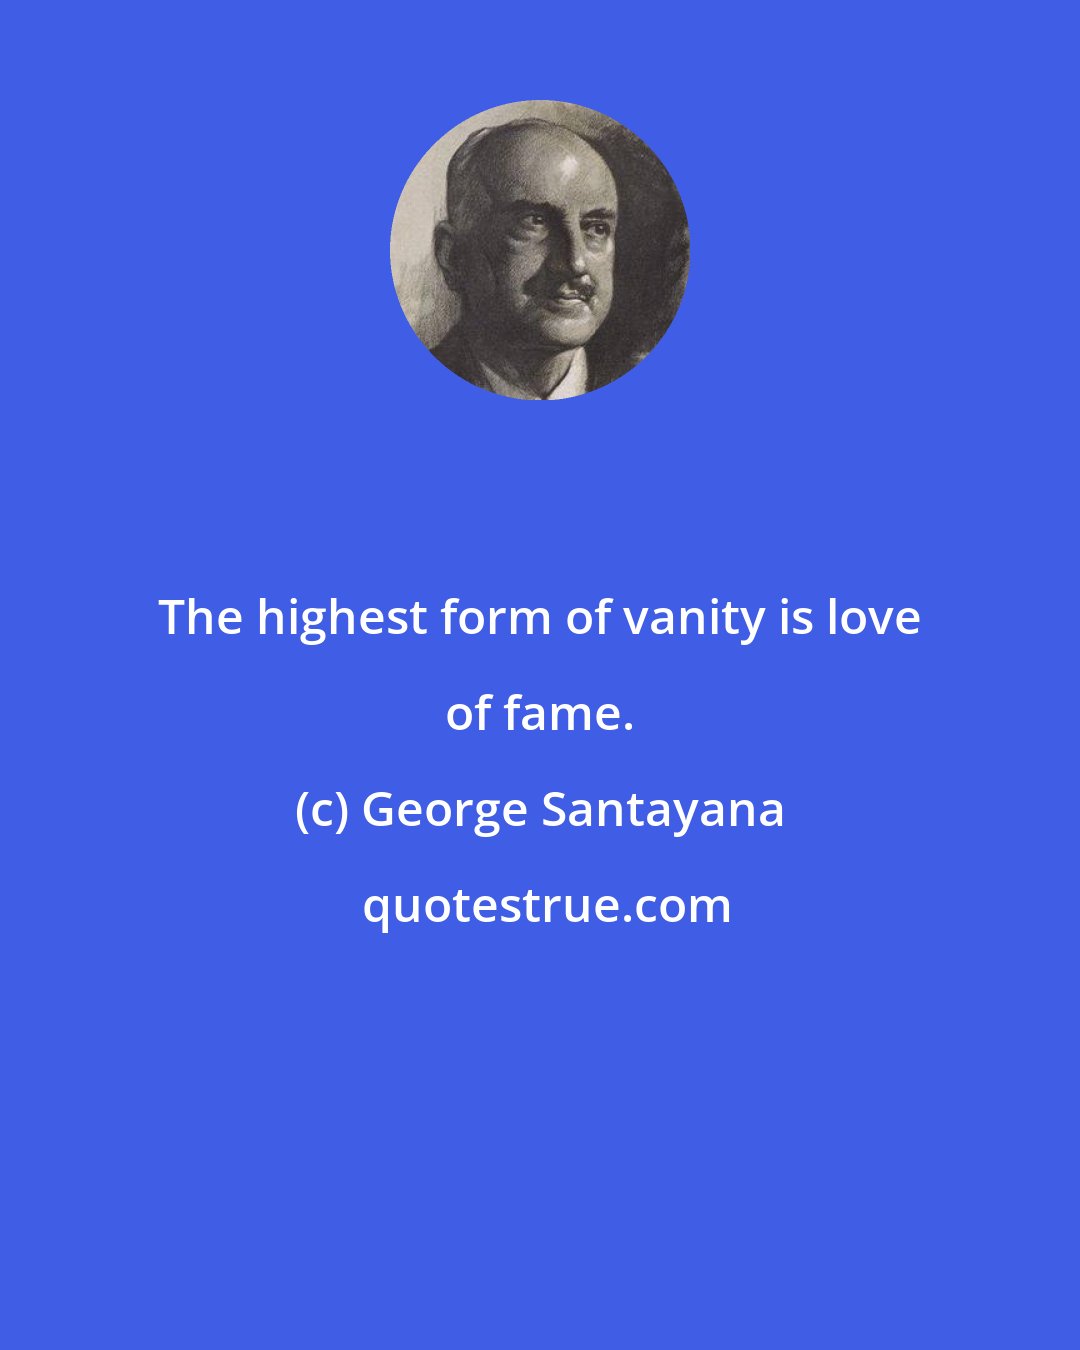 George Santayana: The highest form of vanity is love of fame.